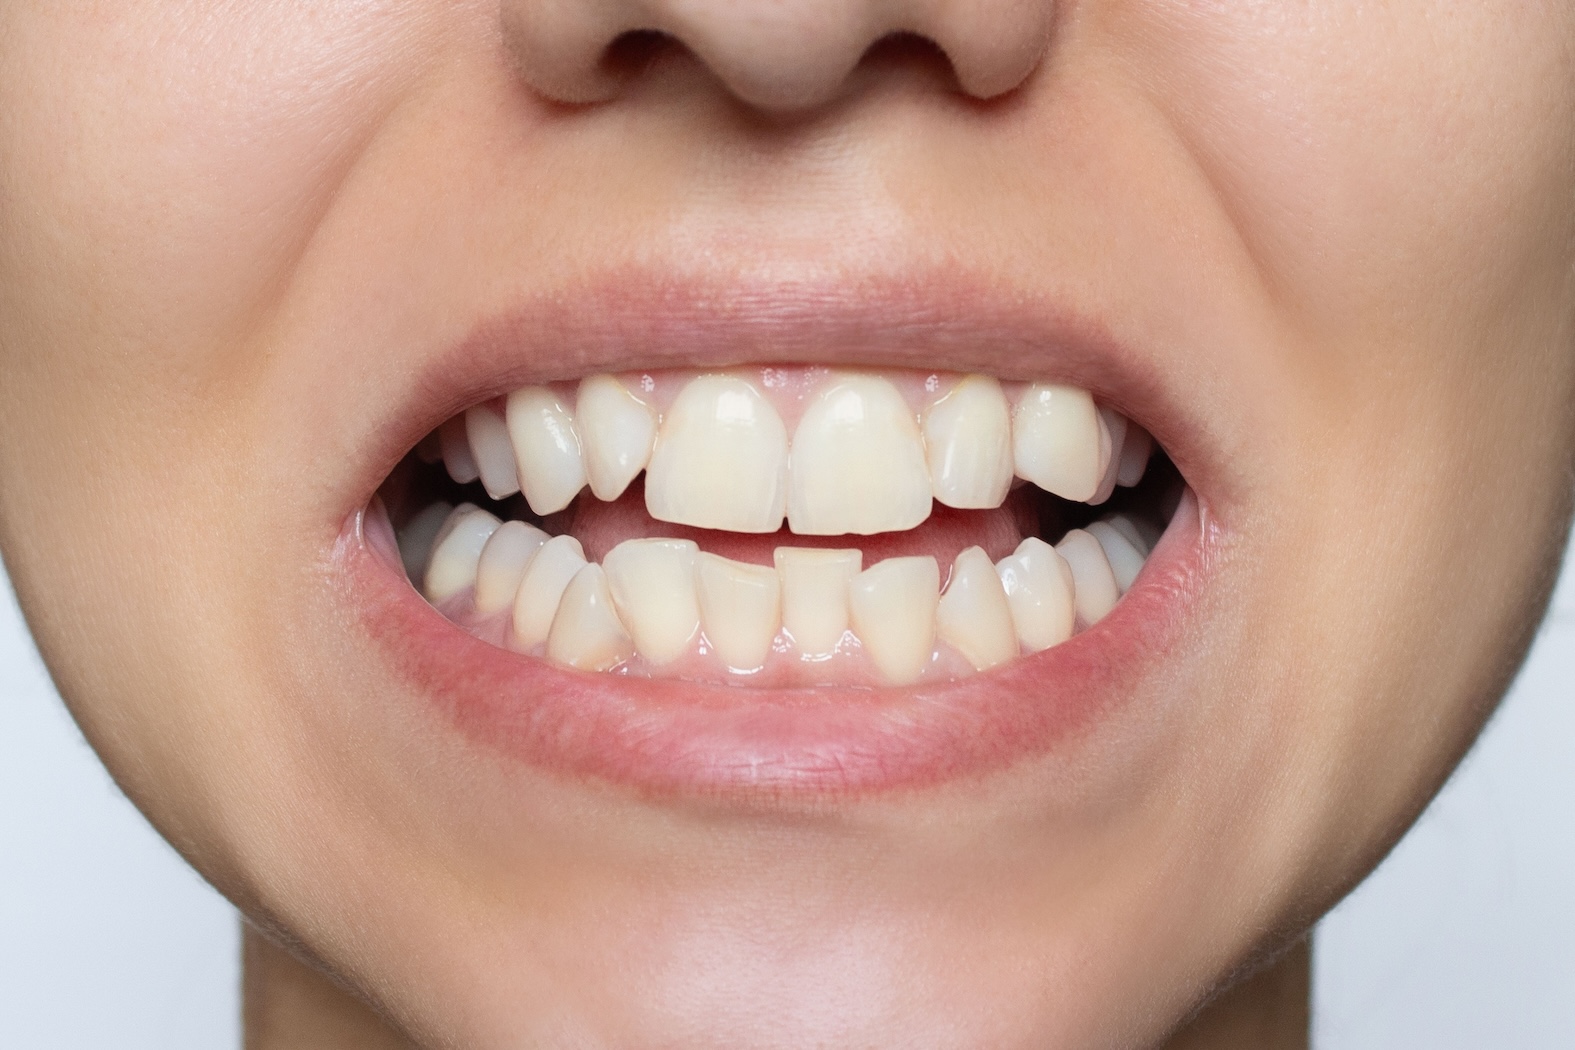 A close-up image of a woman's smile with crooked teeth.